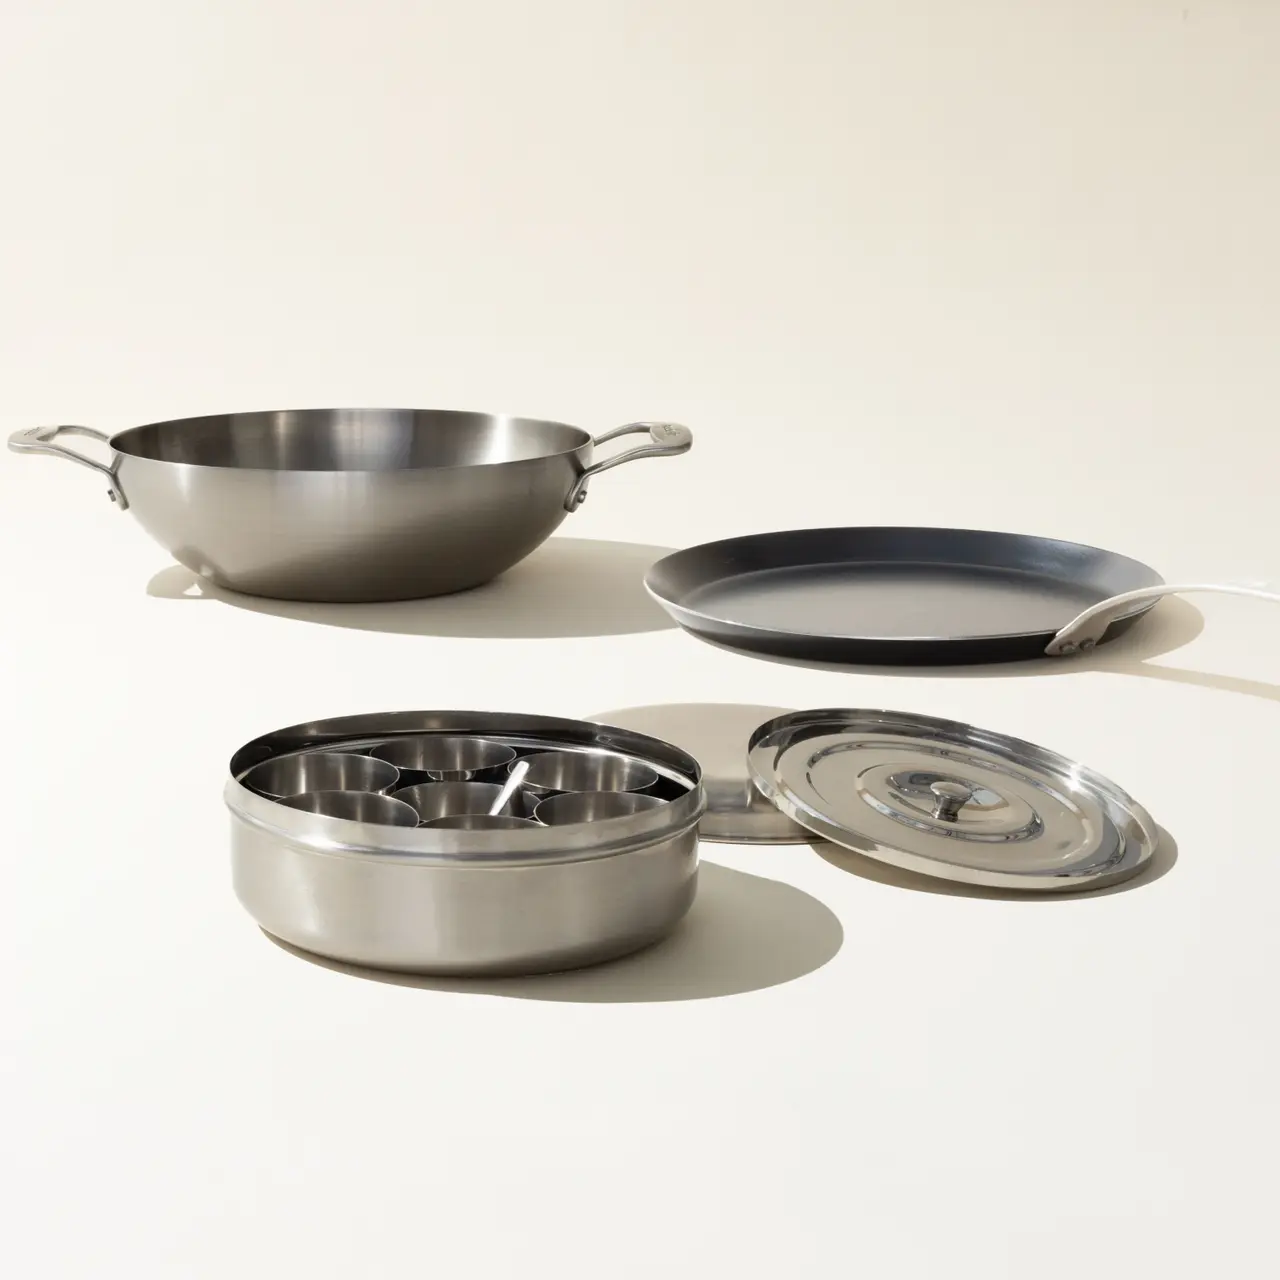 A set of stainless steel cookware, including a wok, skillet, and saucepan with a lid, is arranged on a light background.